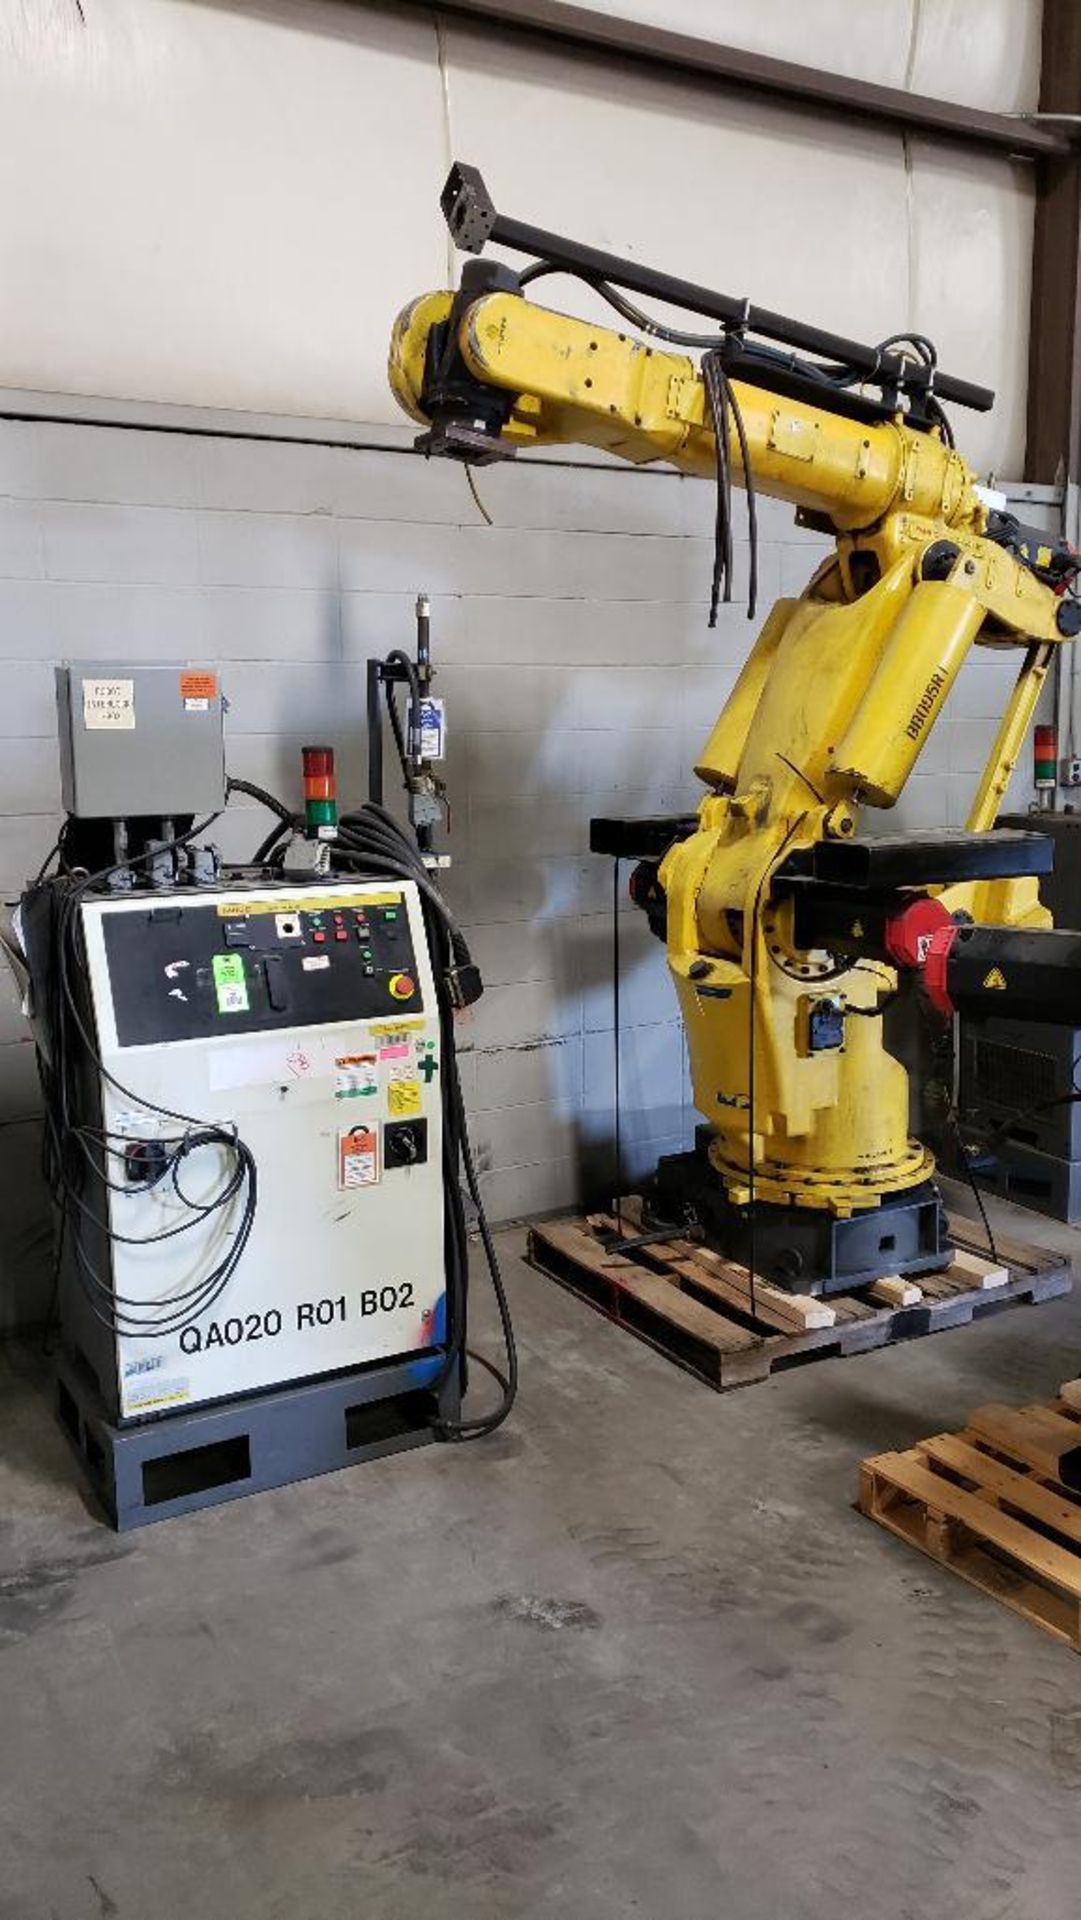 Fanuc S-420iW robot with R-J2 controller.